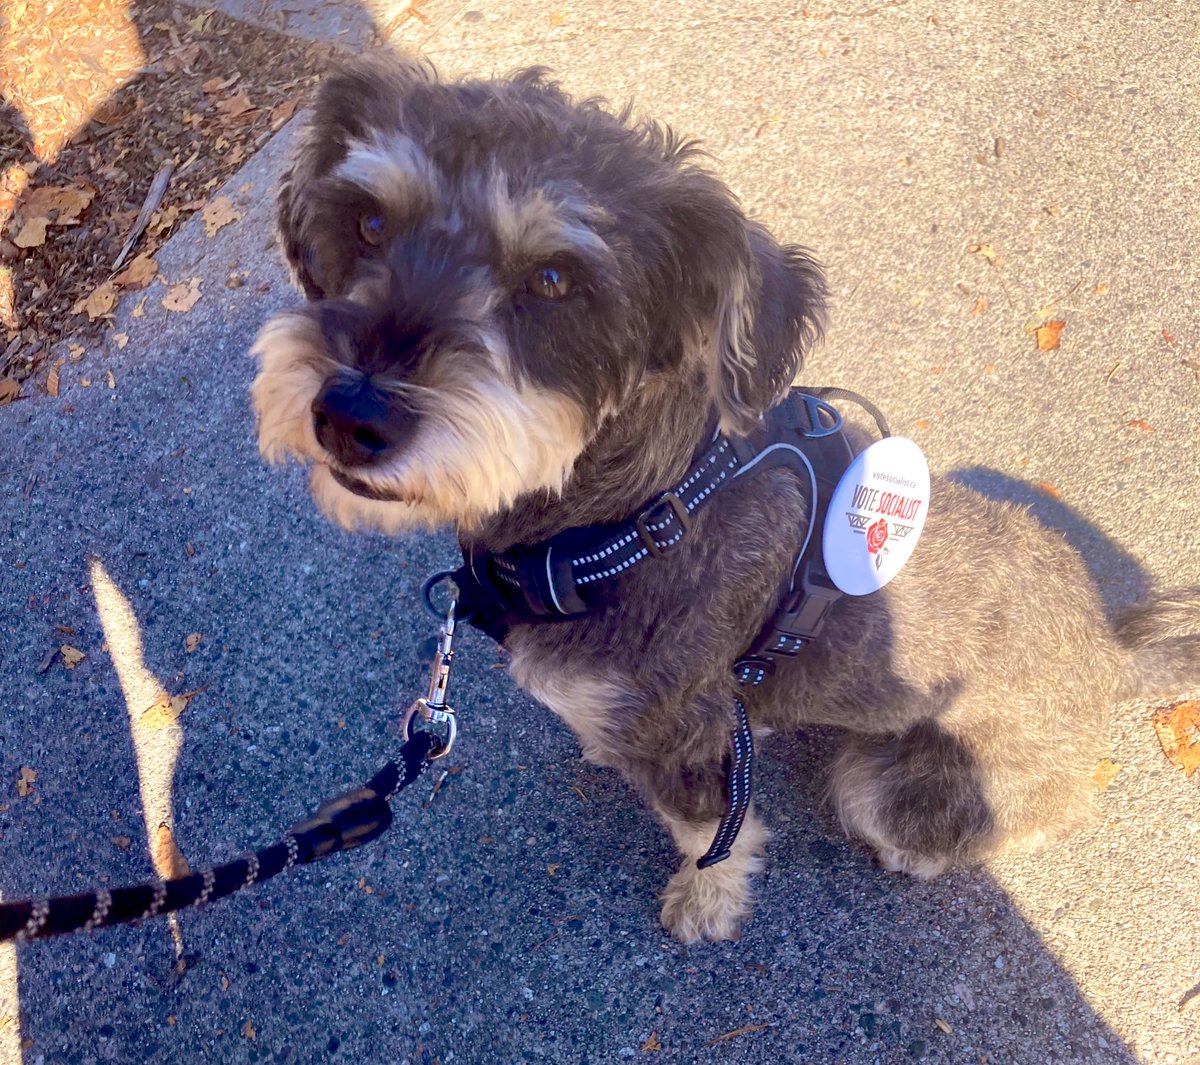 Puppy power! 6 hours left to vote. Go vote socialist for homes for all — and for more dog parks in all our neighbourhoods. #vanpoli #vanelxn